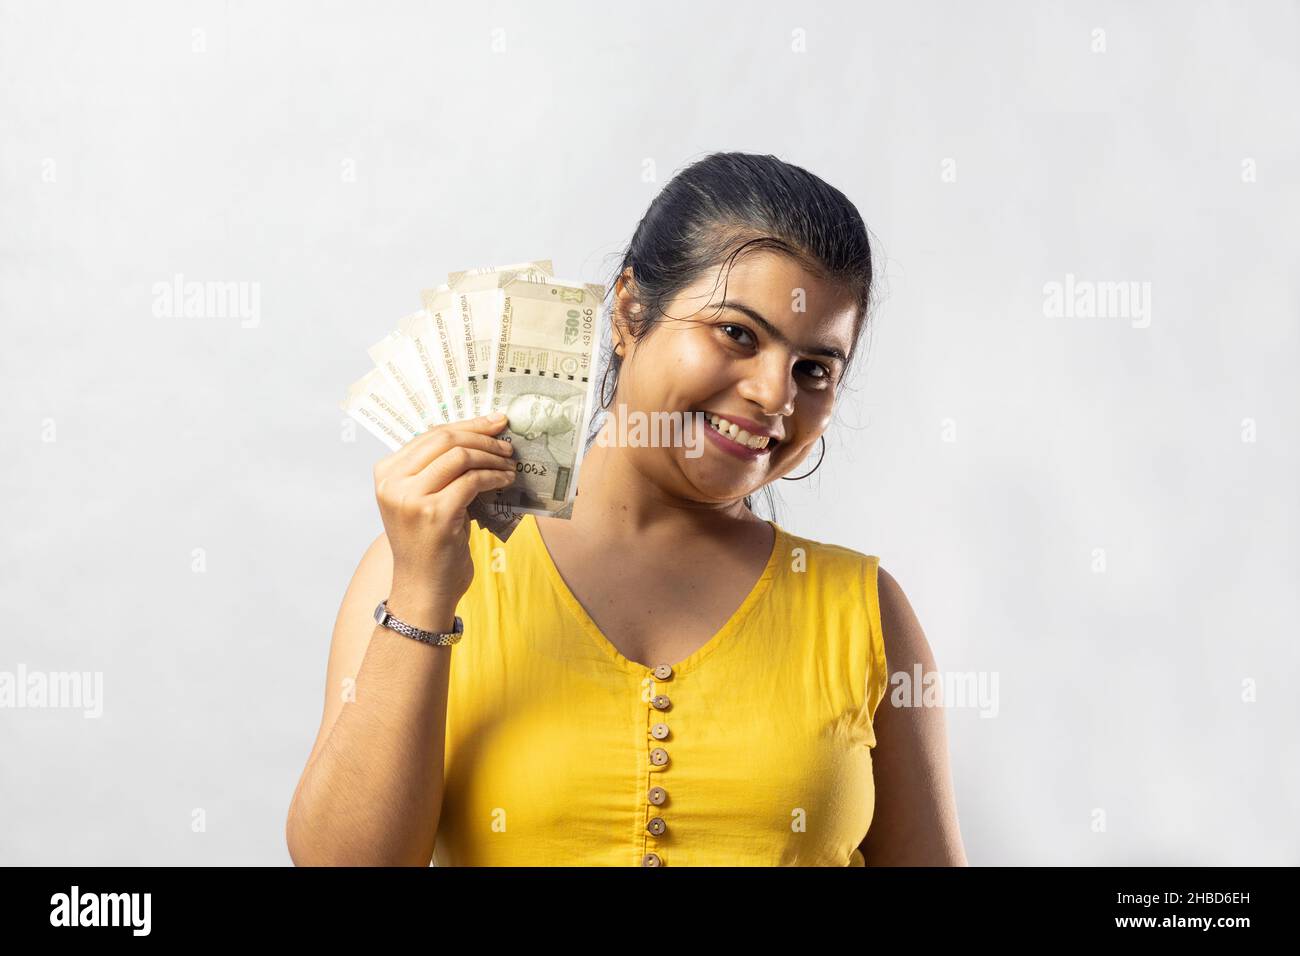 A beautiful Indian woman in yellow dress with cash smiling at the camera on white background Stock Photo